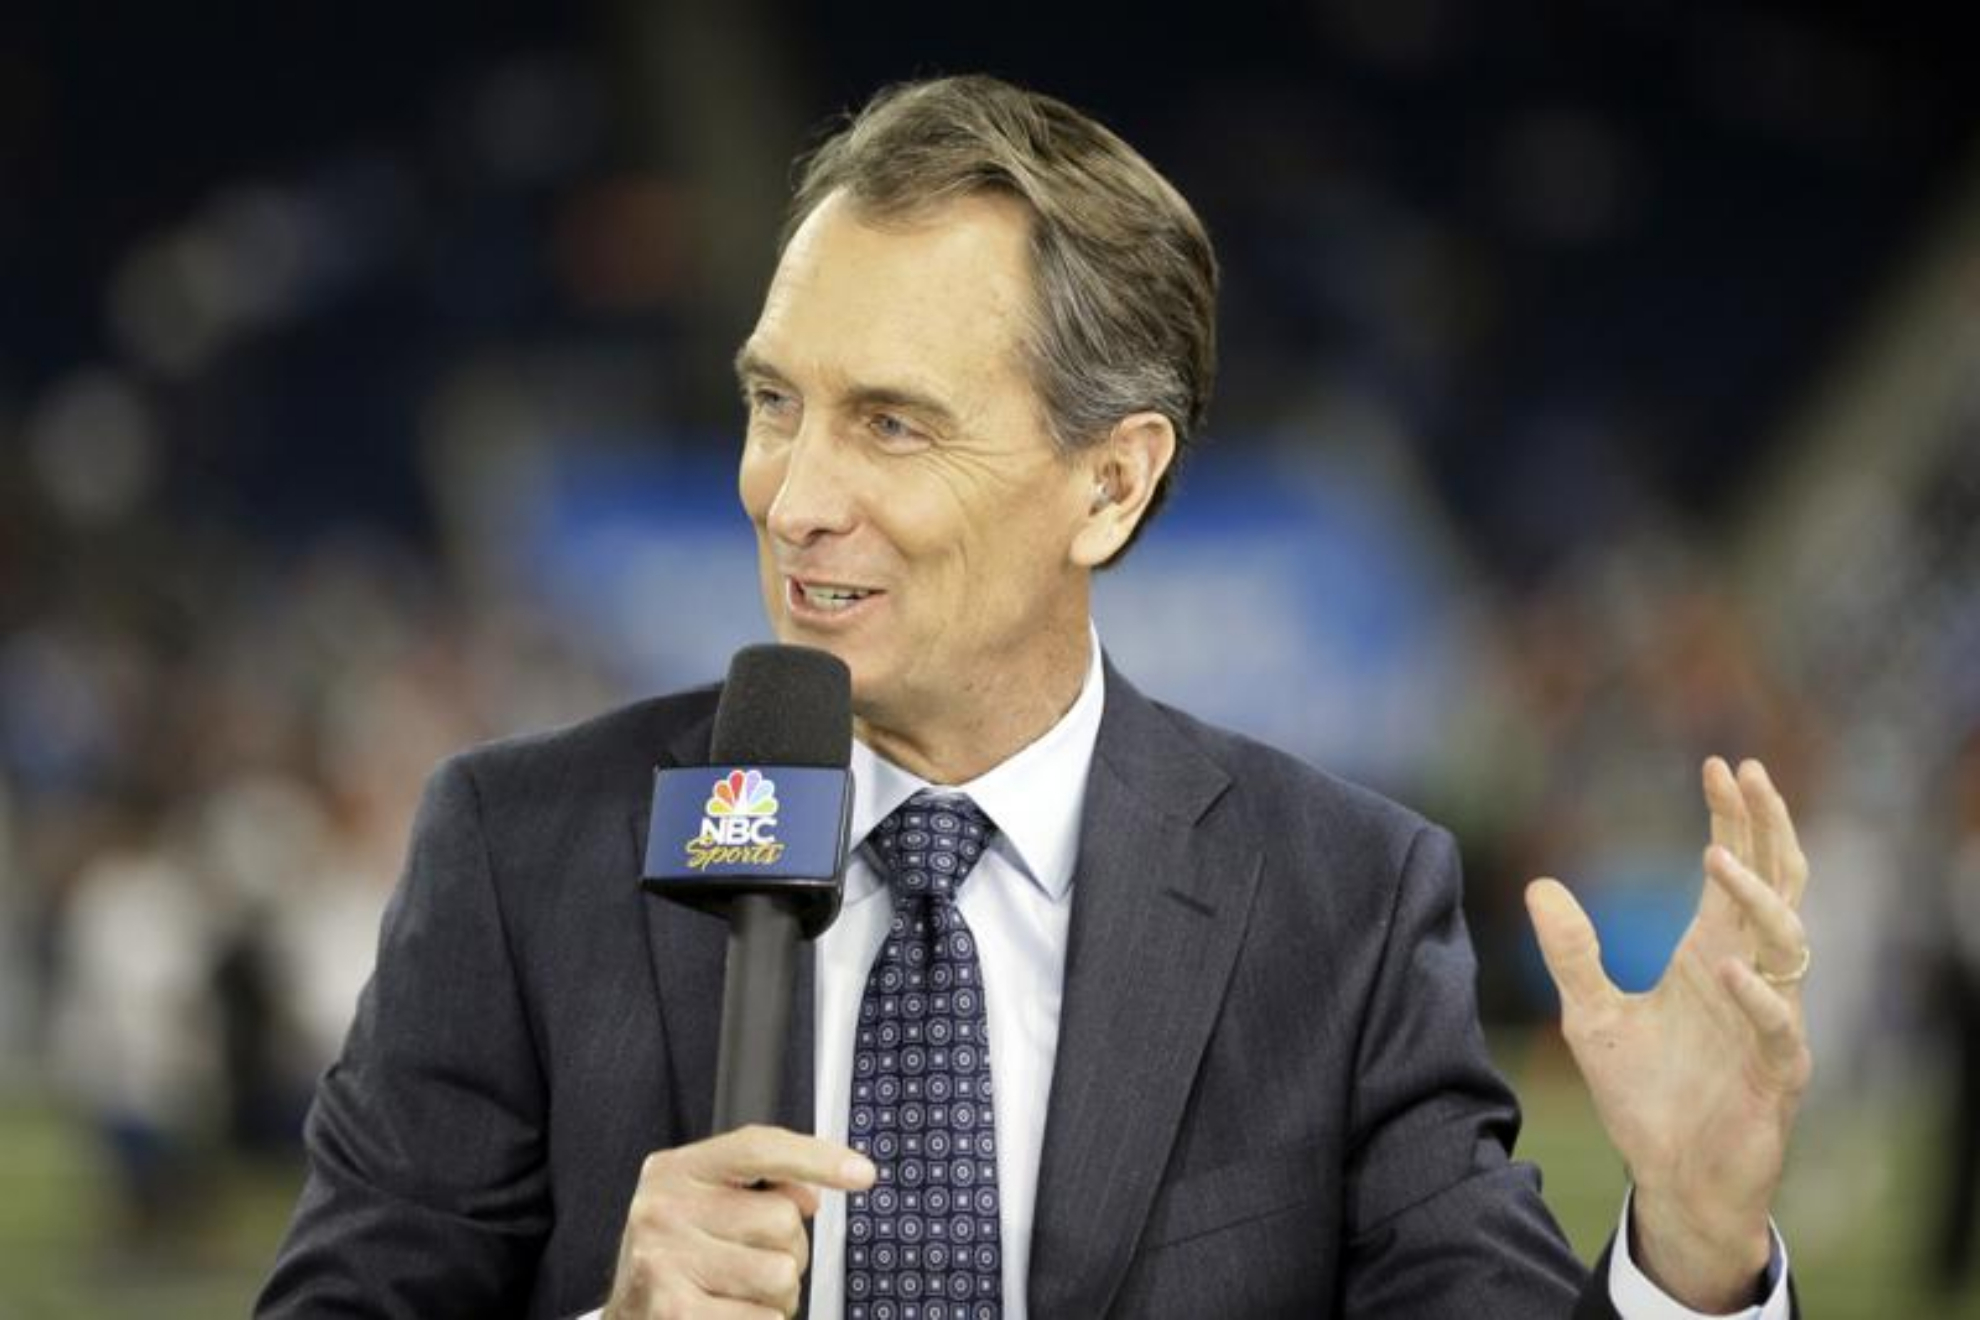 NBC Sports analyst Cris Collinsworth is seen during an NFL football game.